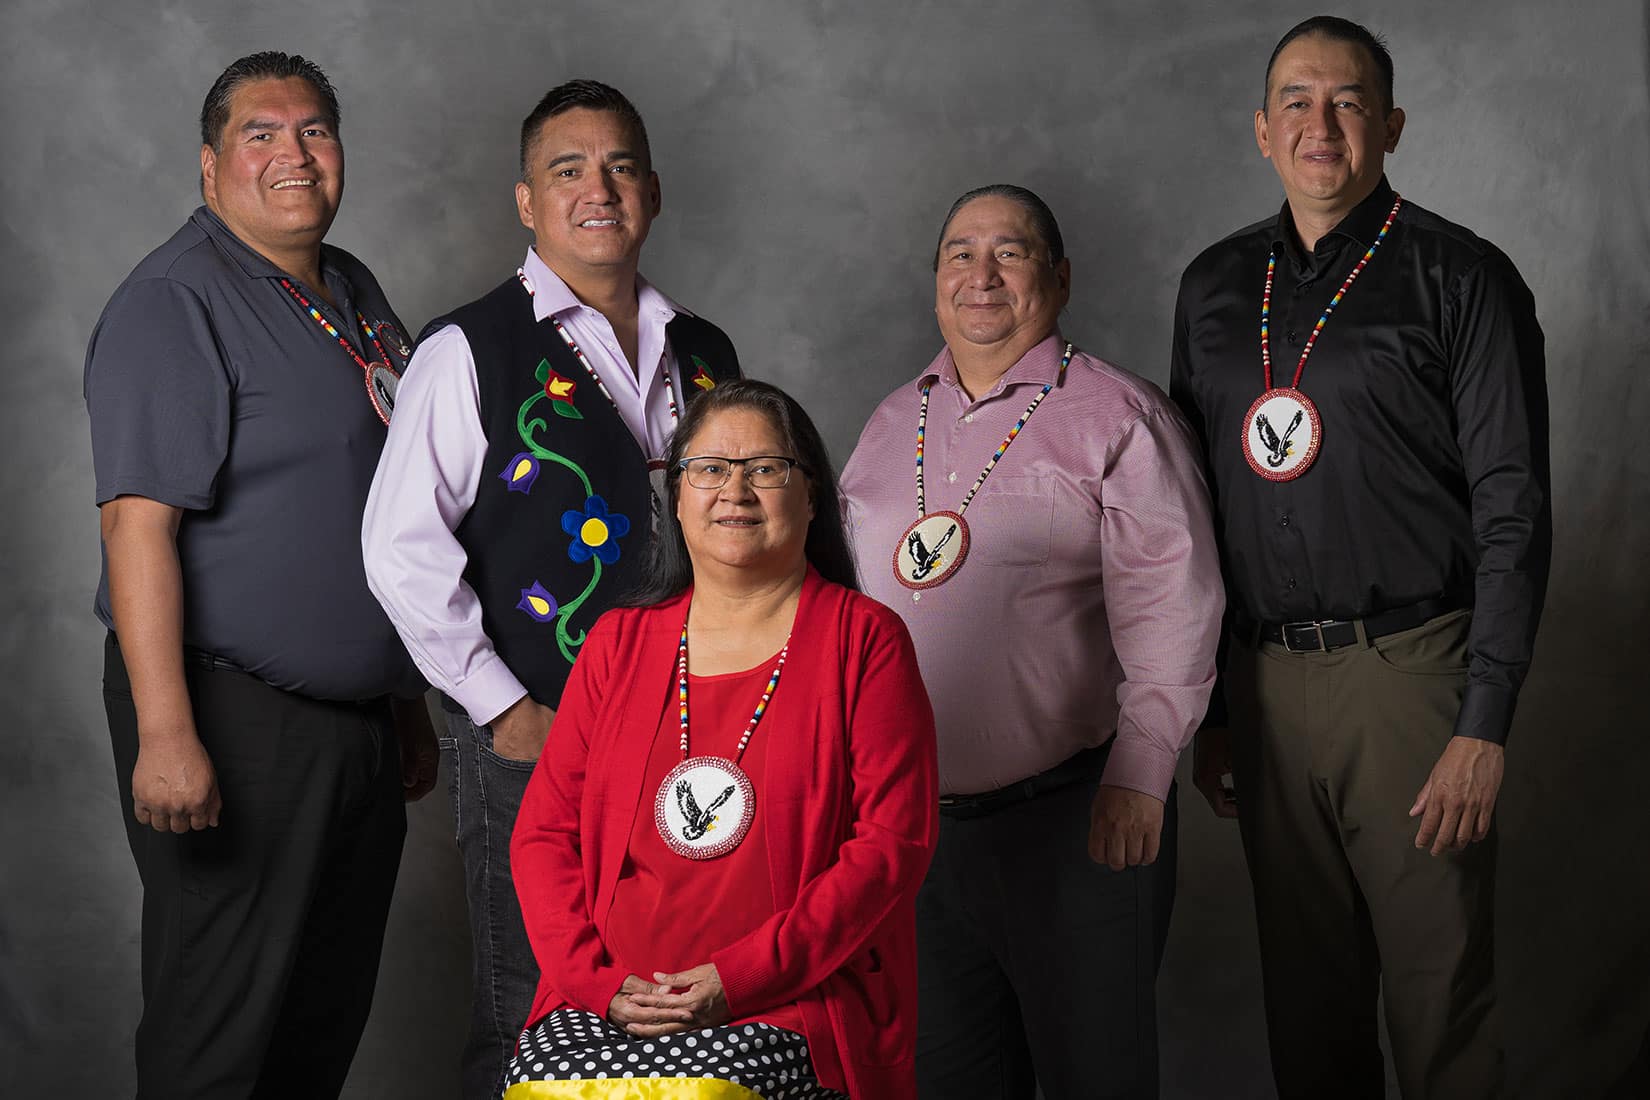 KFN Chief and Council 2021